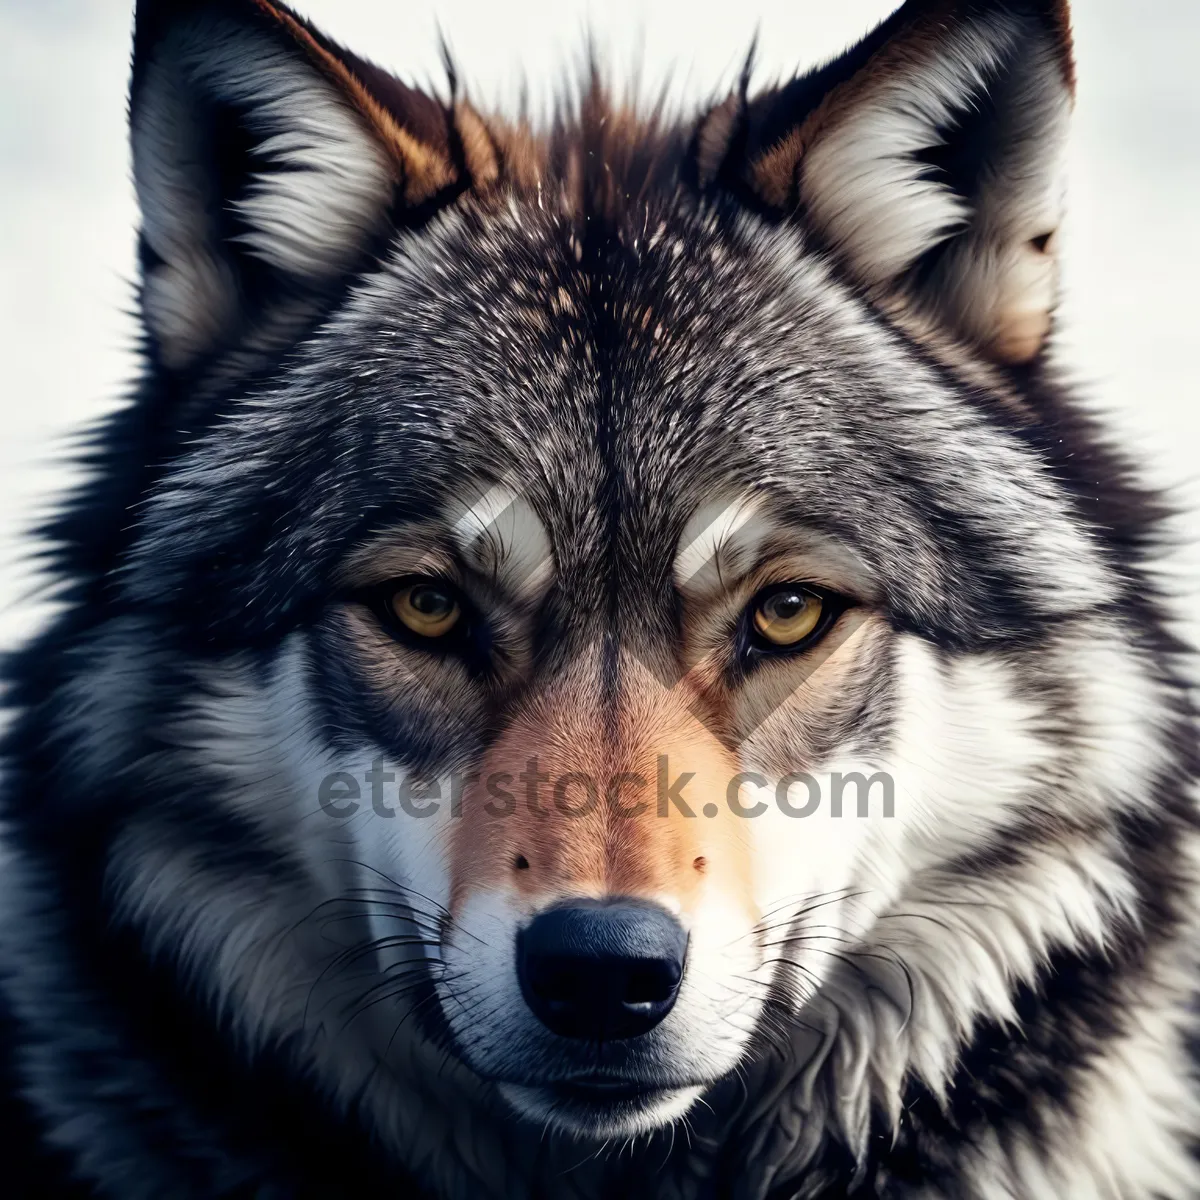 Picture of Furry Canine: Adorable Domestic Dog with Piercing Eyes